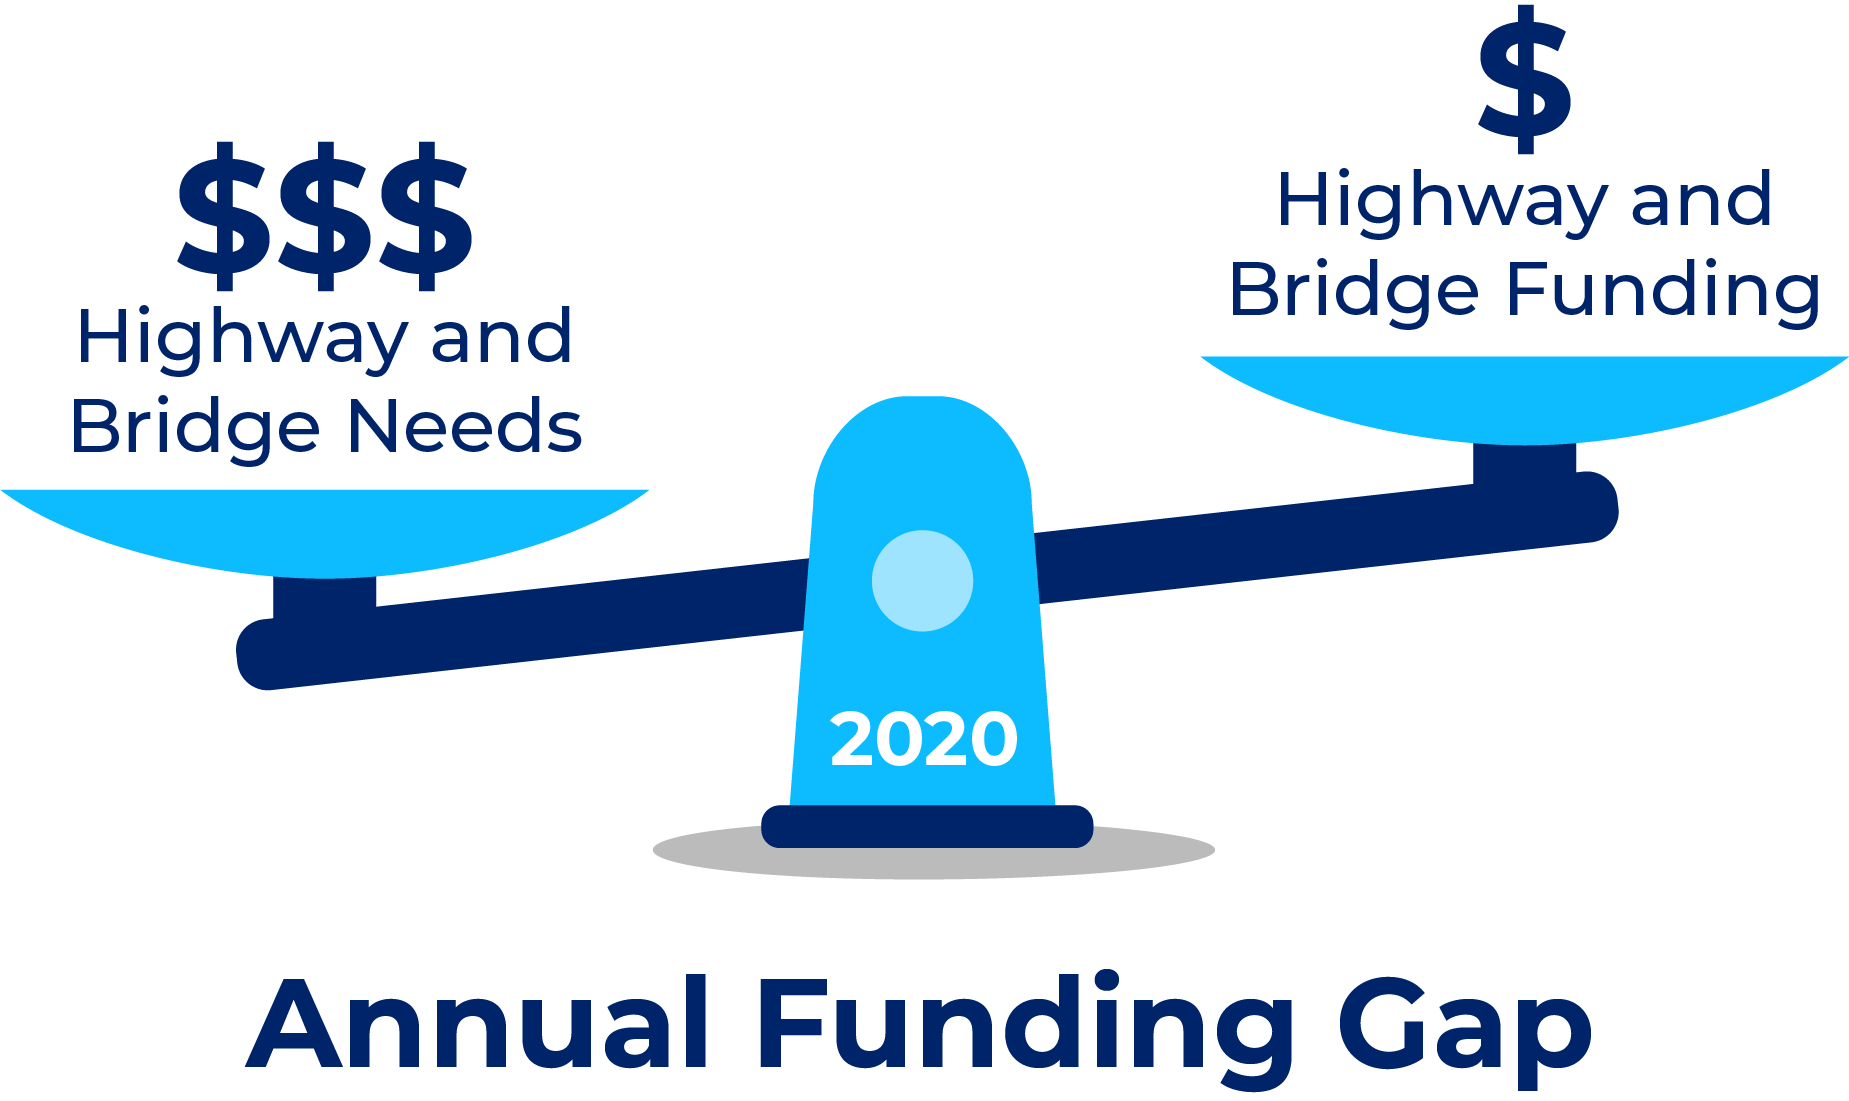 Graphic of a scale tipping to the left to show that our transportation needs are greater than the available funding in 2020.